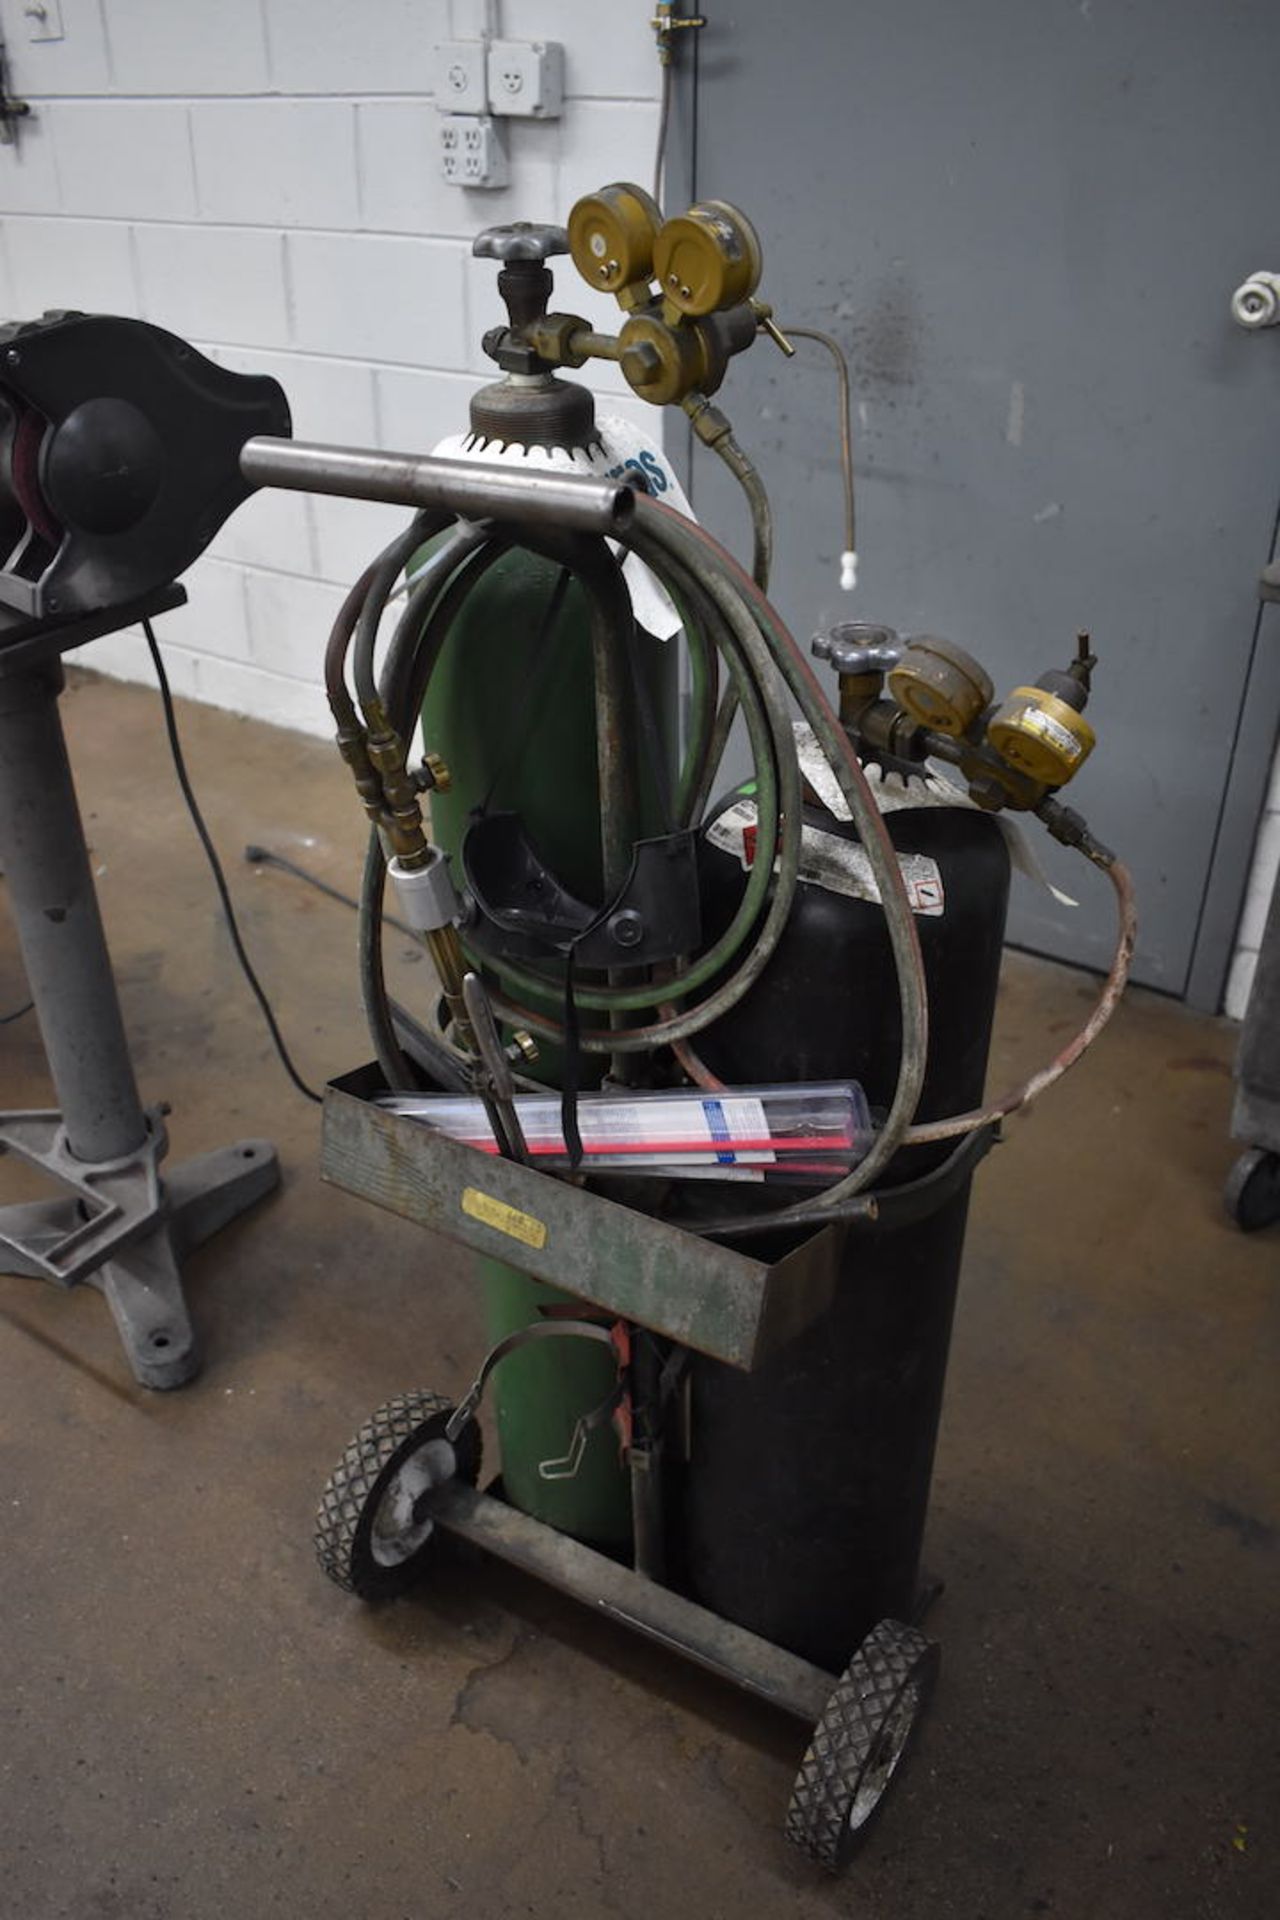 Welding Cart with Torch, Hose & Gauges (Niles, IL) - Image 2 of 2